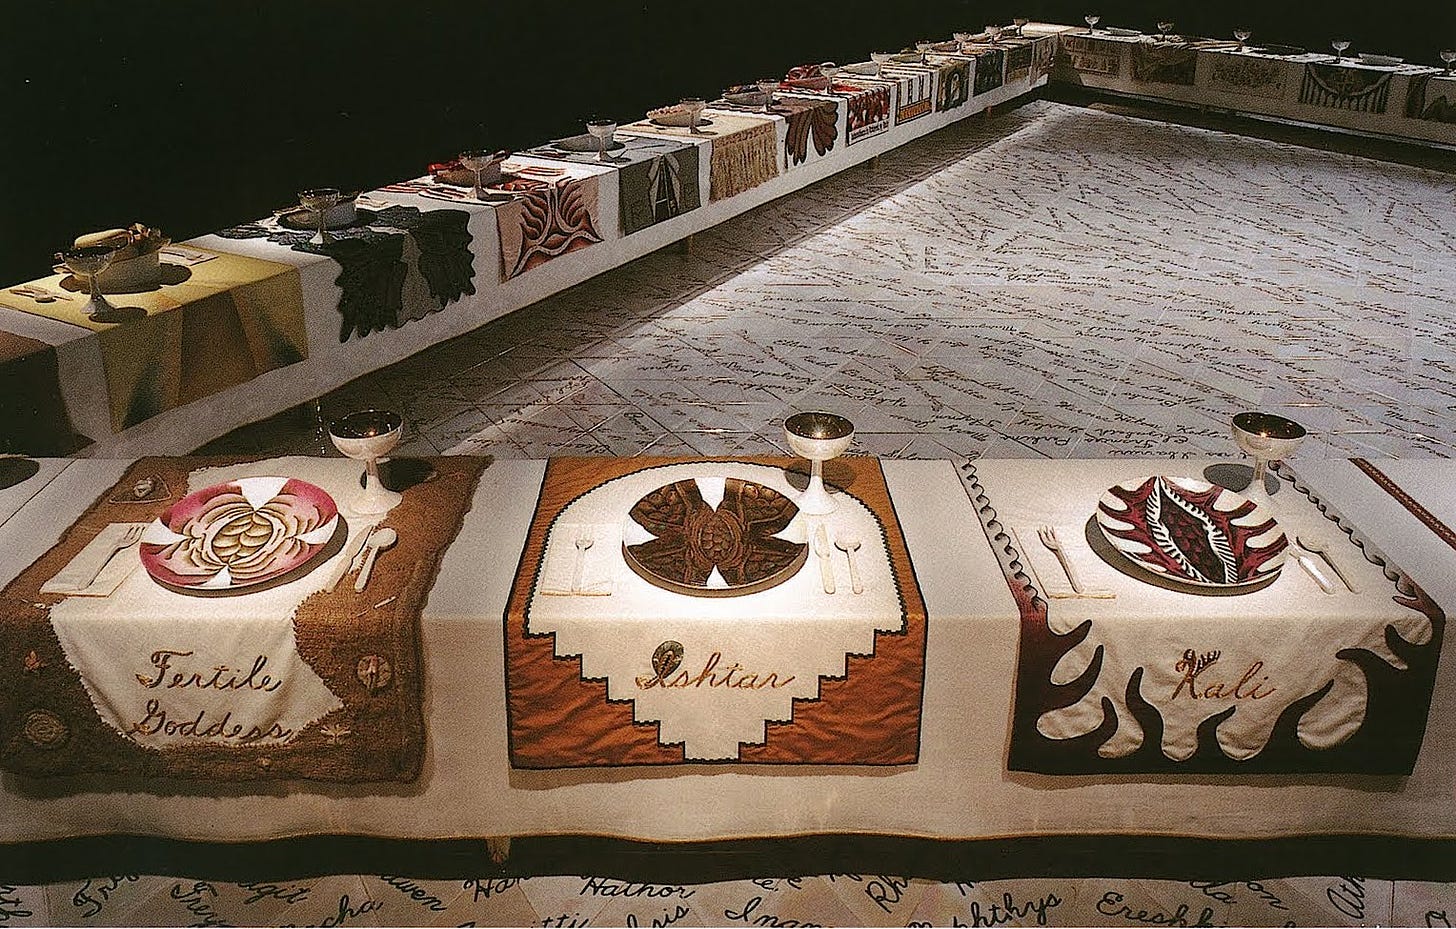 WOMENSART on X: "The Dinner Party (detail) (1979), installation by Judy  Chicago, regarded as first epic feminist artwork #womensart  https://t.co/jbPNvThh67" / X